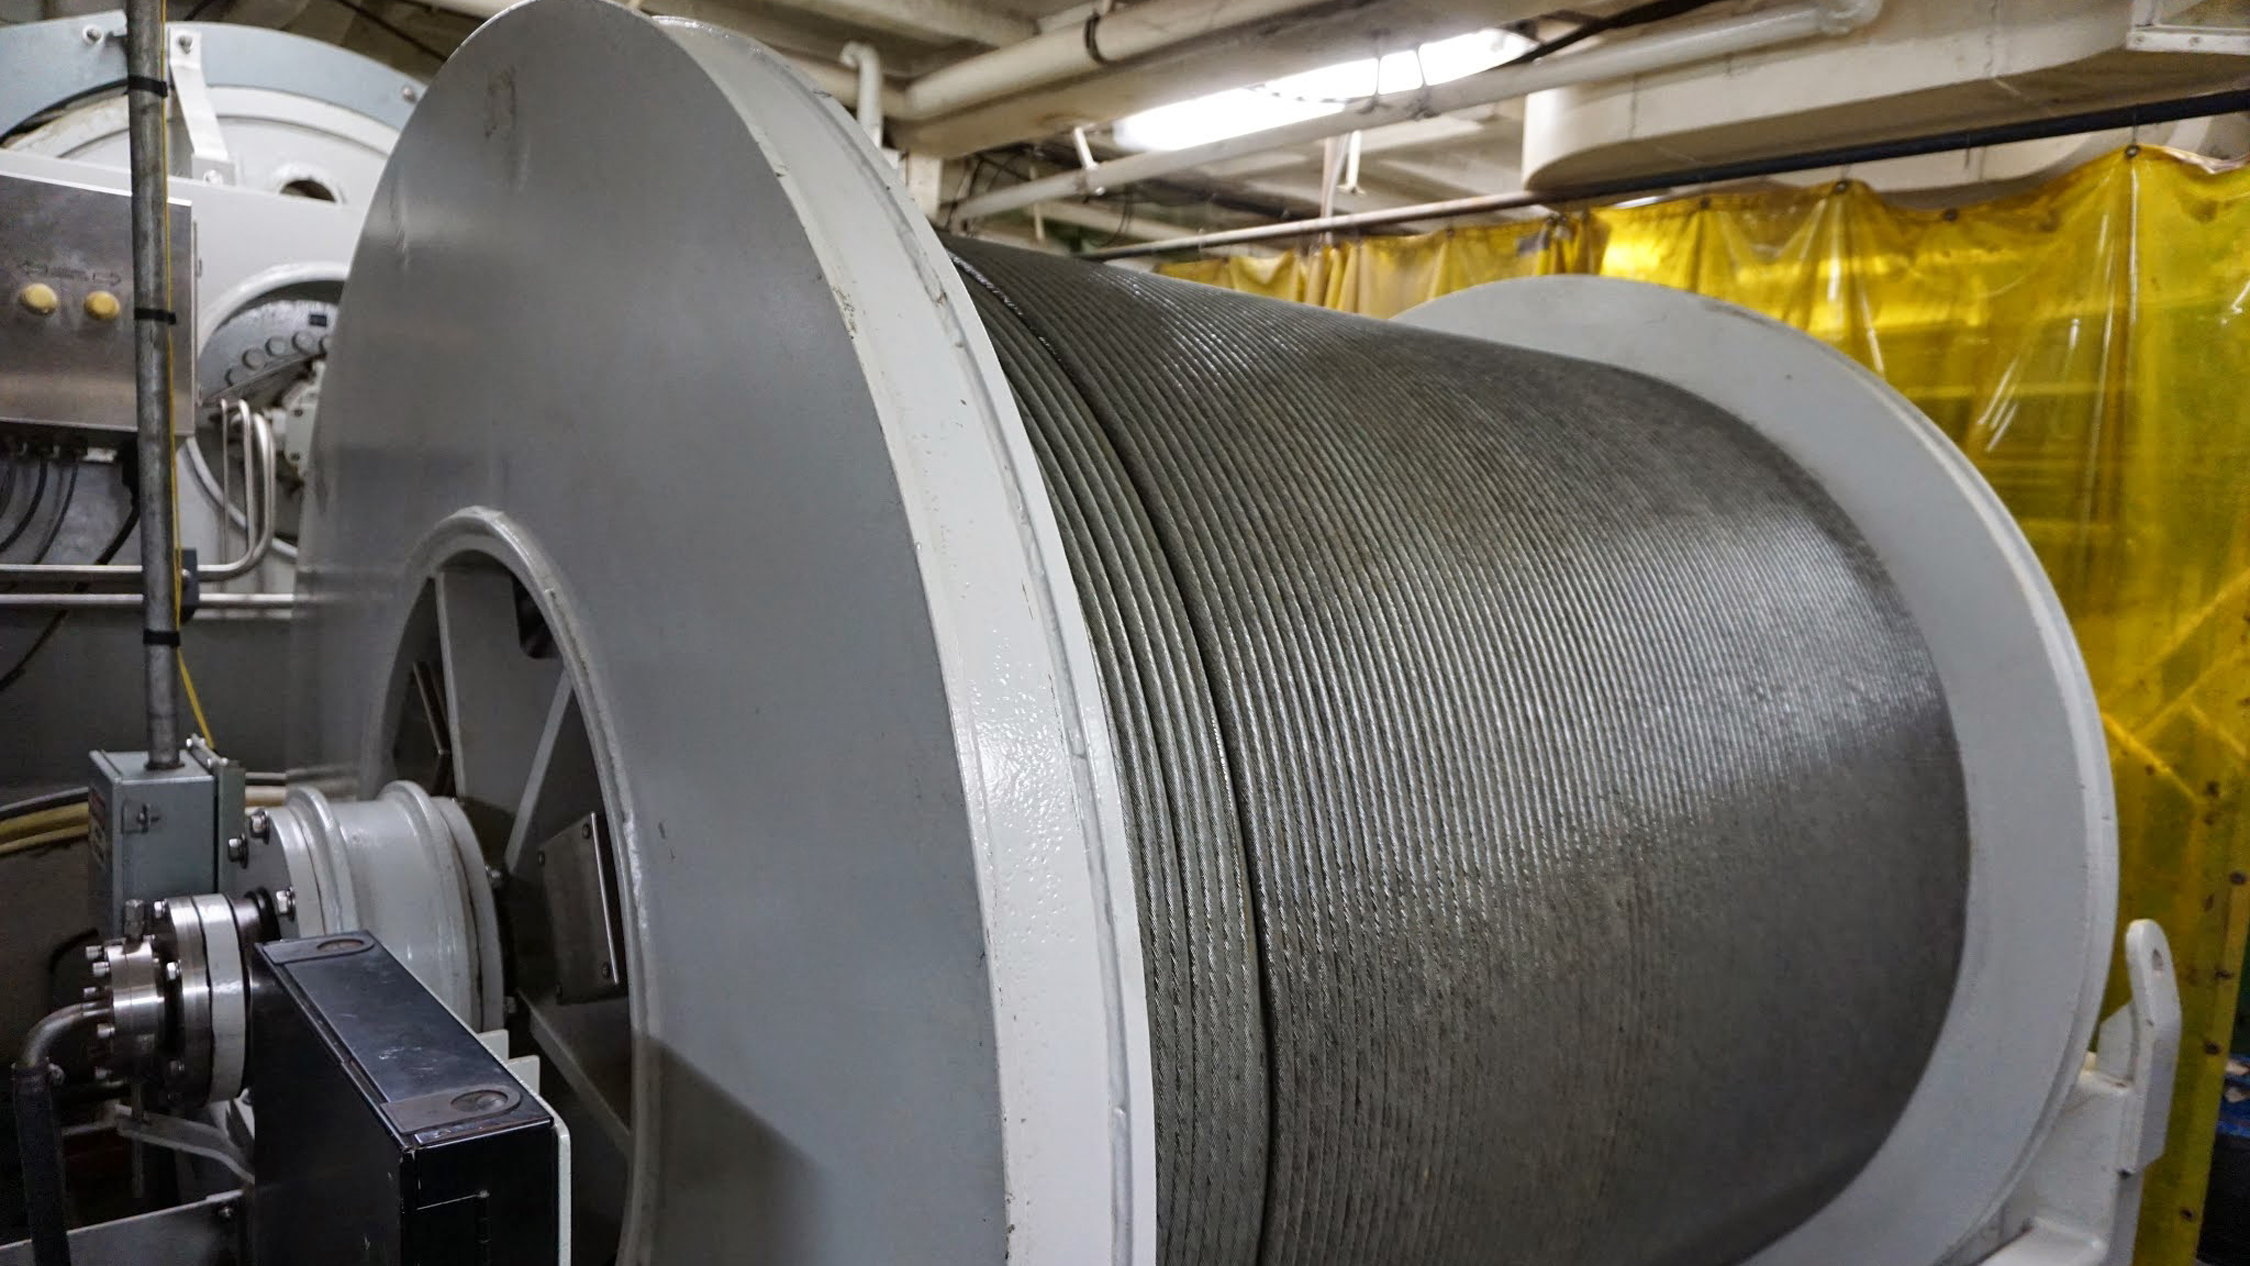 A massive winch lowers Deep Discoverer using a 0.68-inch-wide, 26,000-foot-long cable.